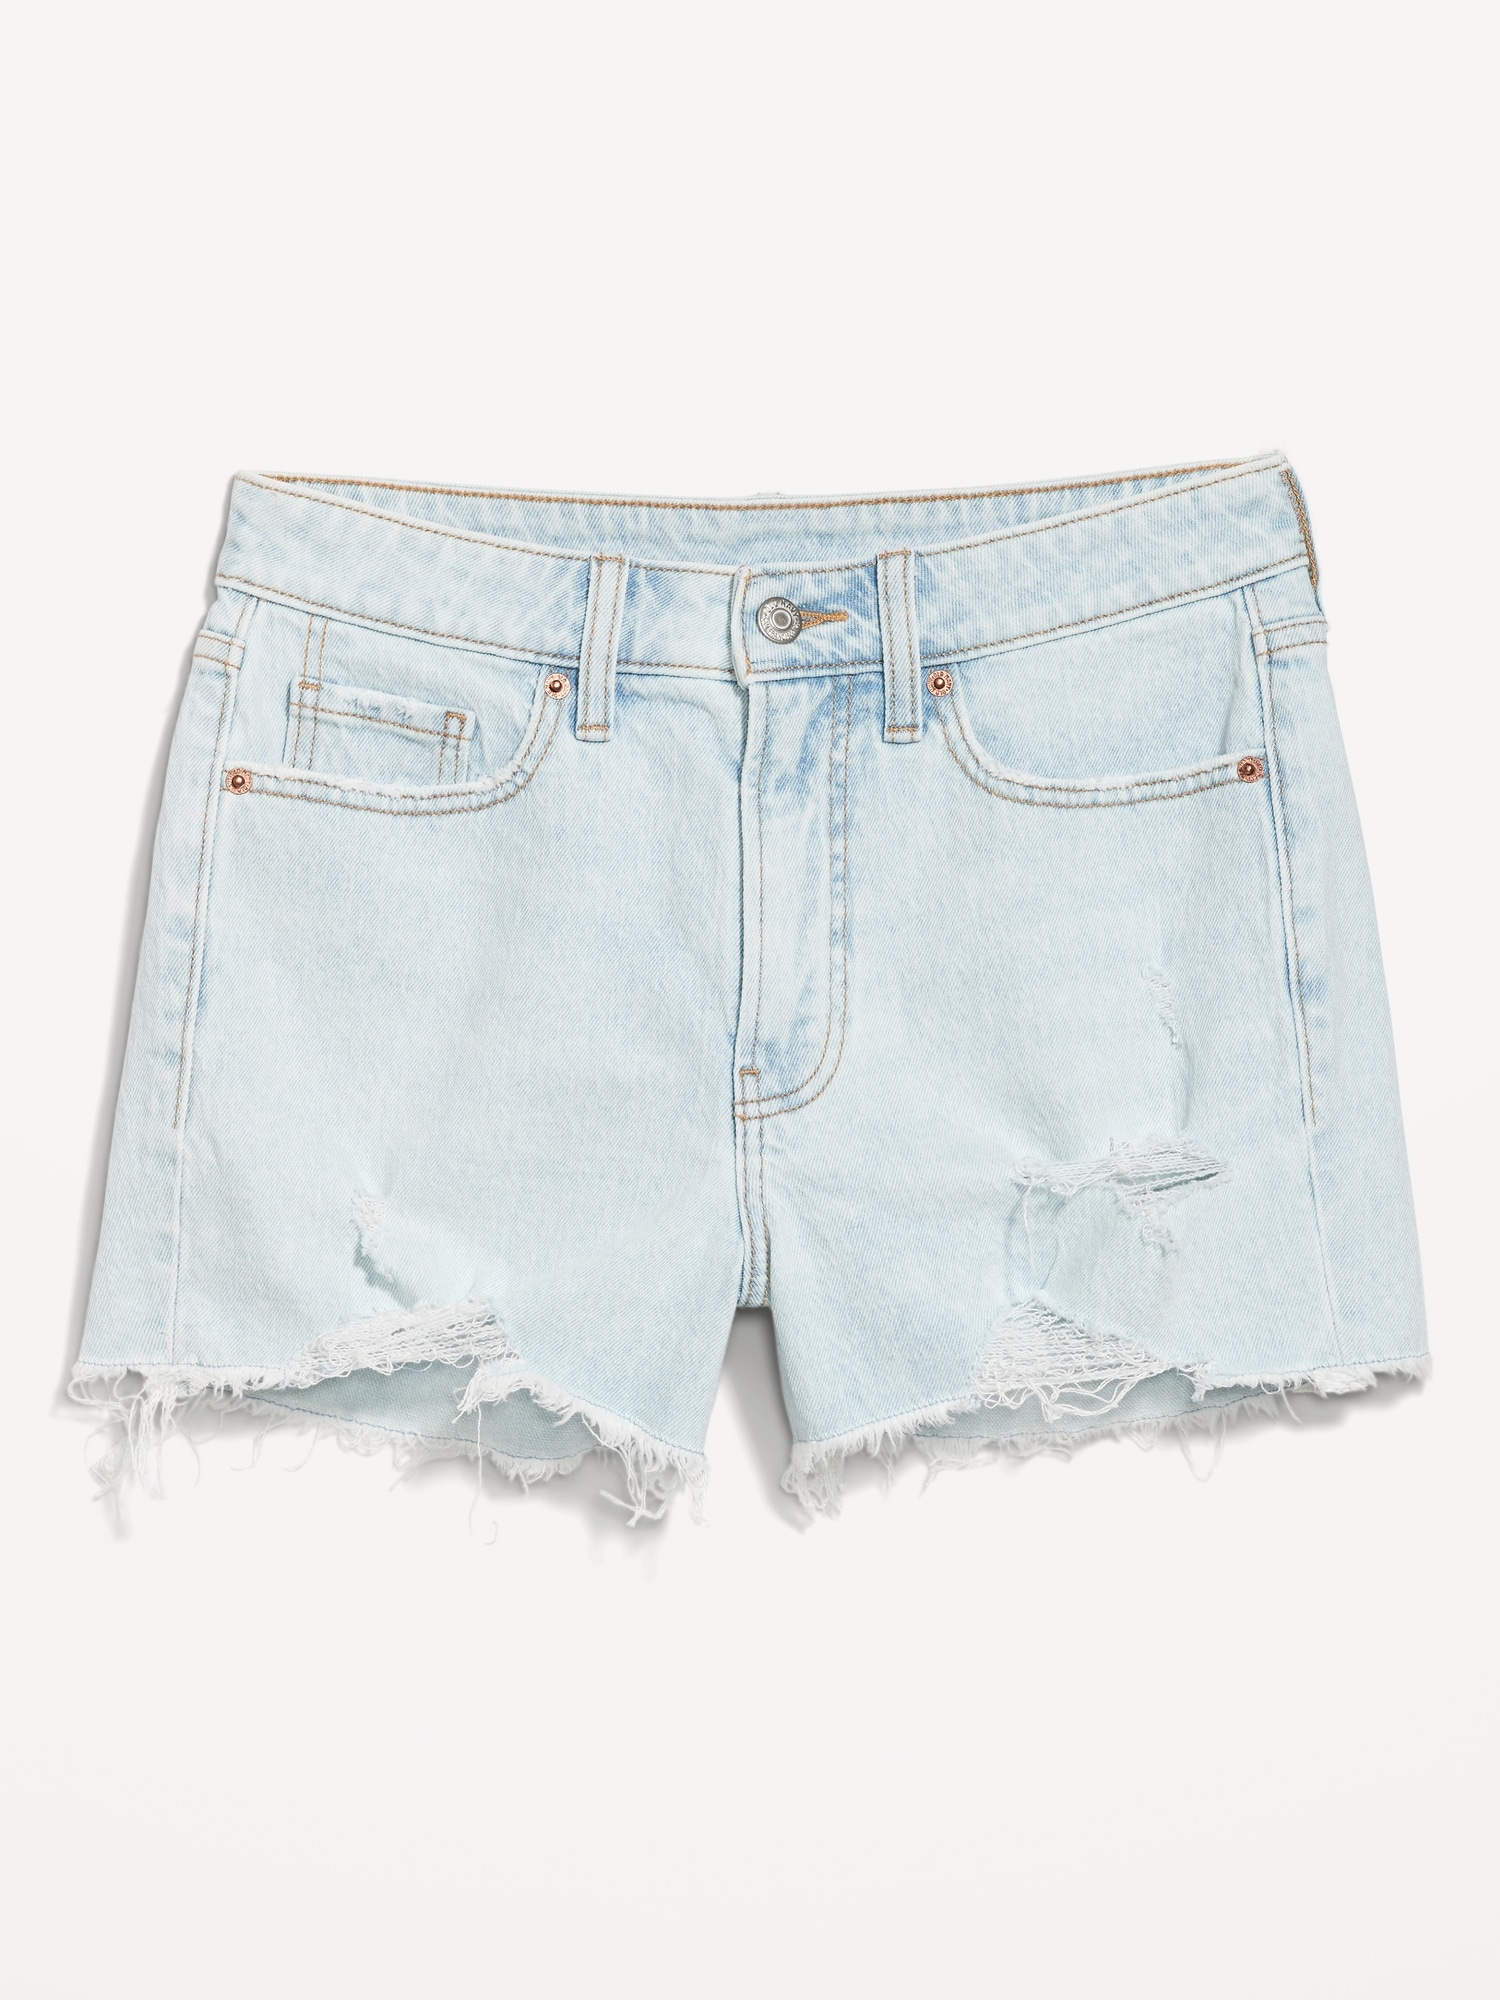 High-Waisted OG Straight Ripped Jean Shorts -- 3-inch inseam | Old Navy